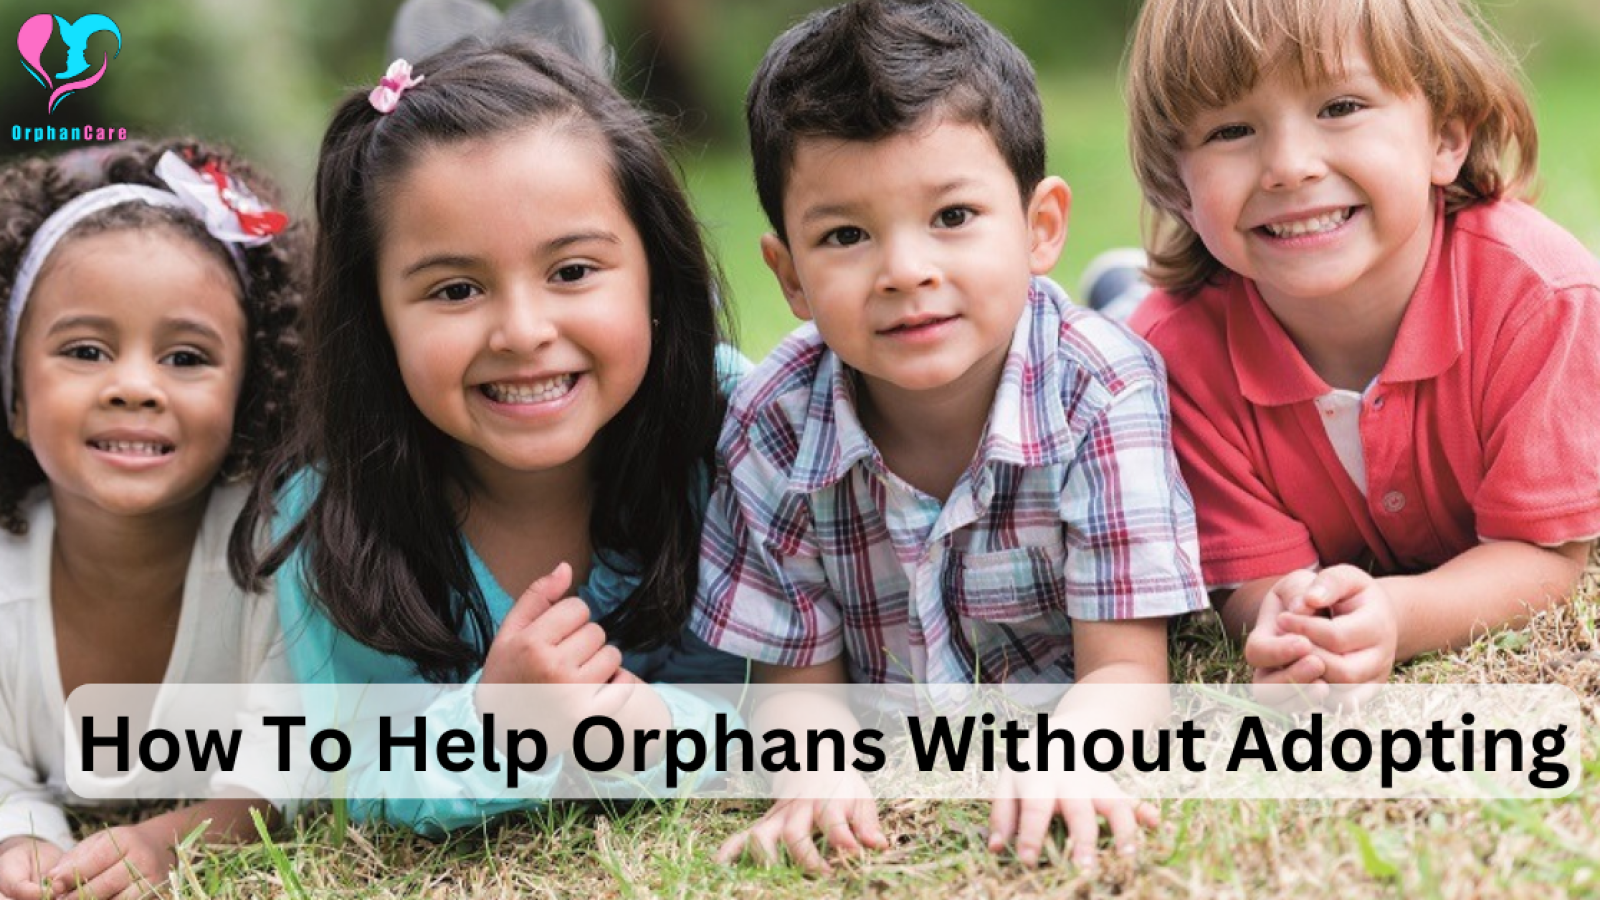 How To Help Orphans Without Adopting